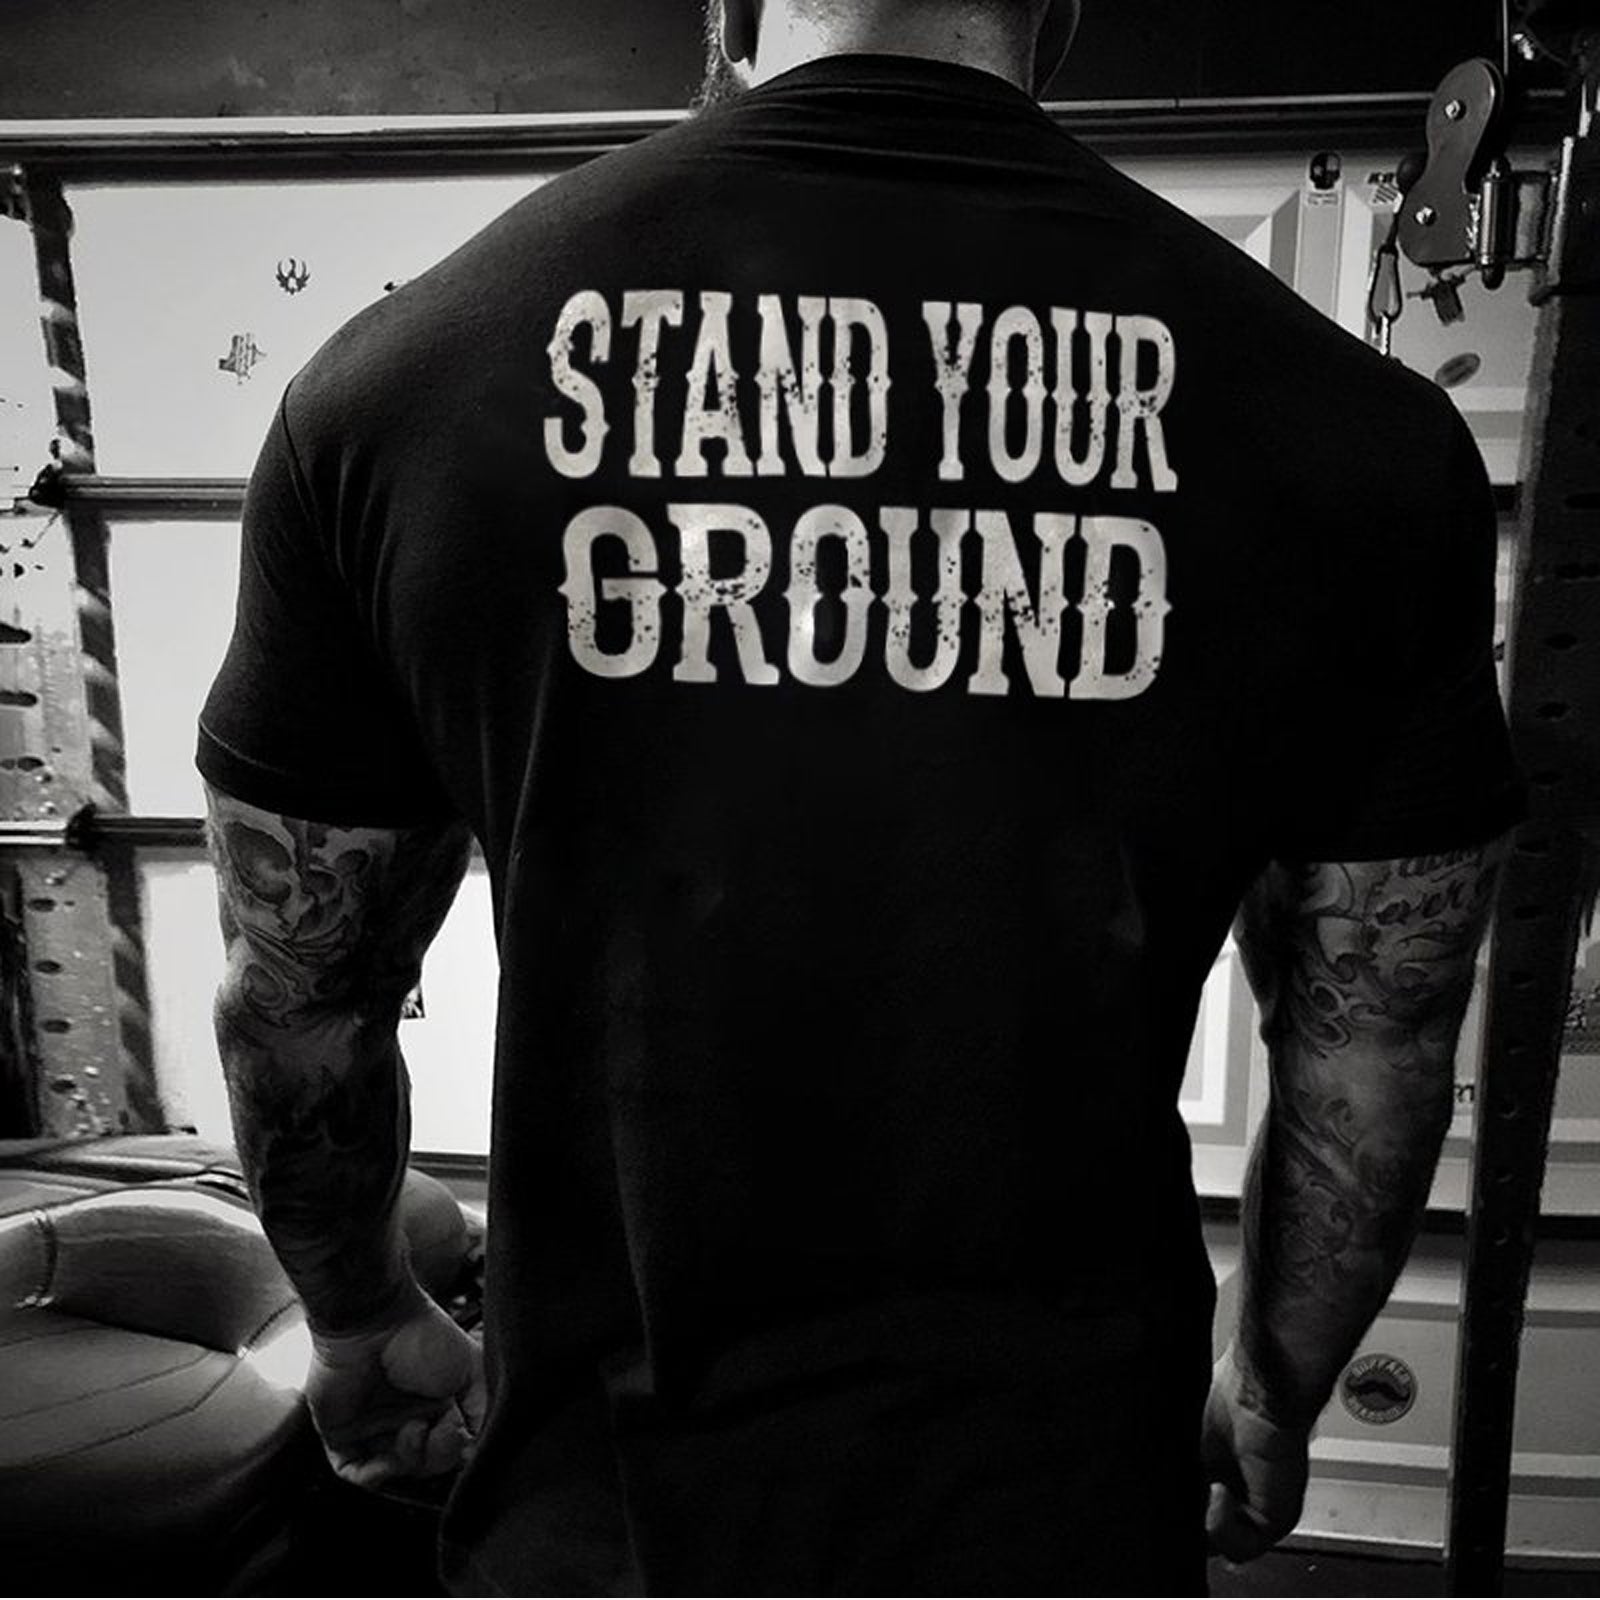 Livereid Stand Your Ground Letter T-Shirt - chicyea